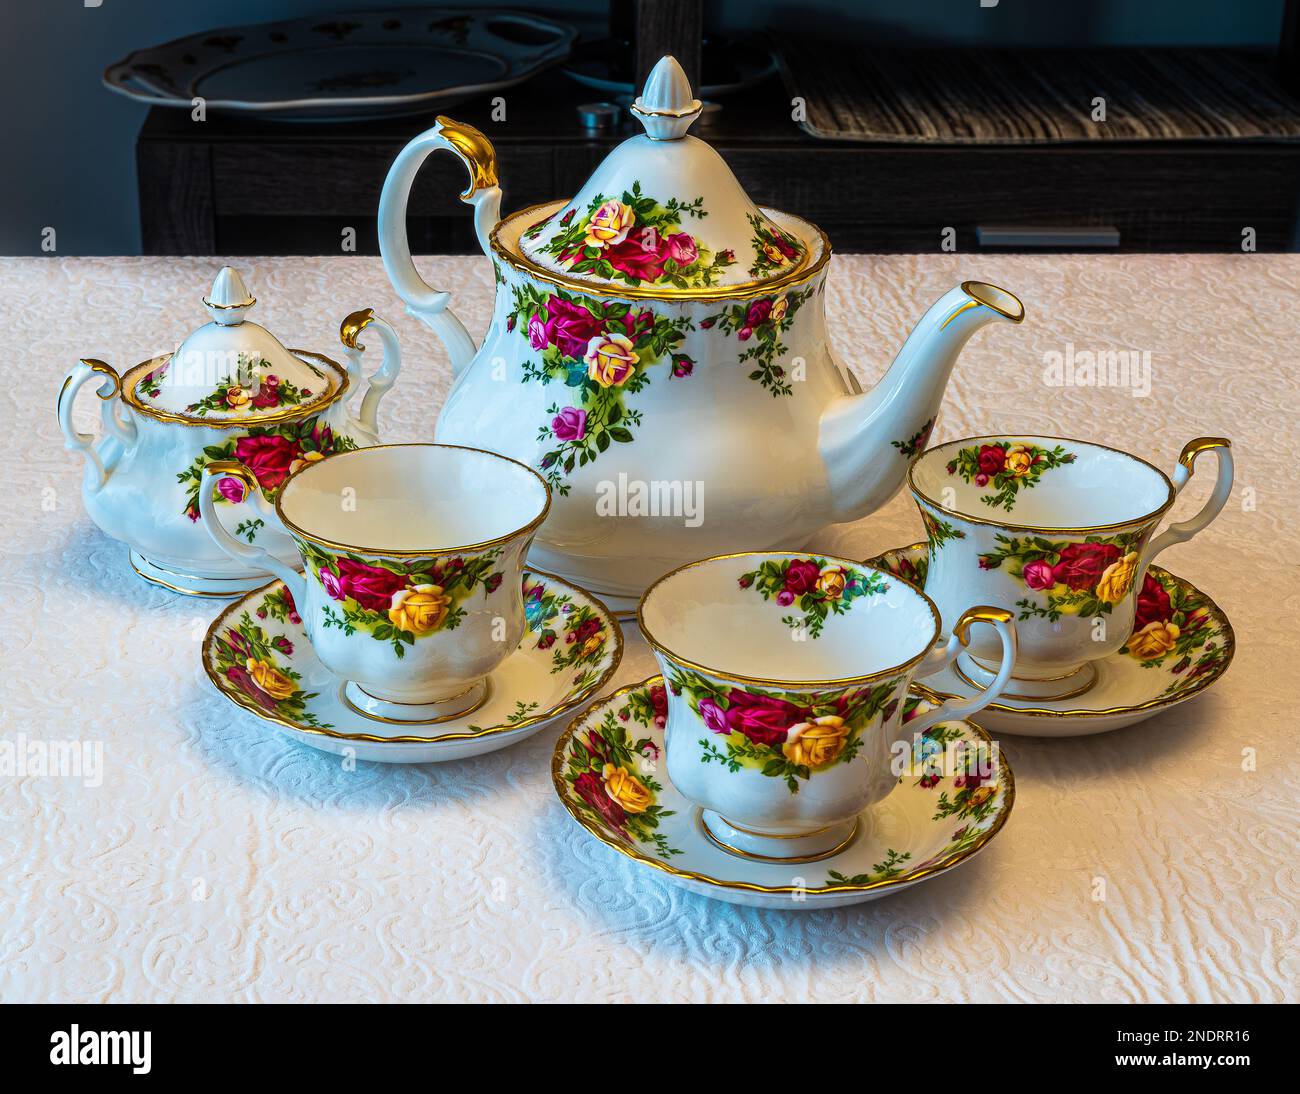 Royal Albert porcelain tableware, coffee cup. Hand-painted flowers. Can be used to illustrate porcelain dishes in newspapers. Stock Photo